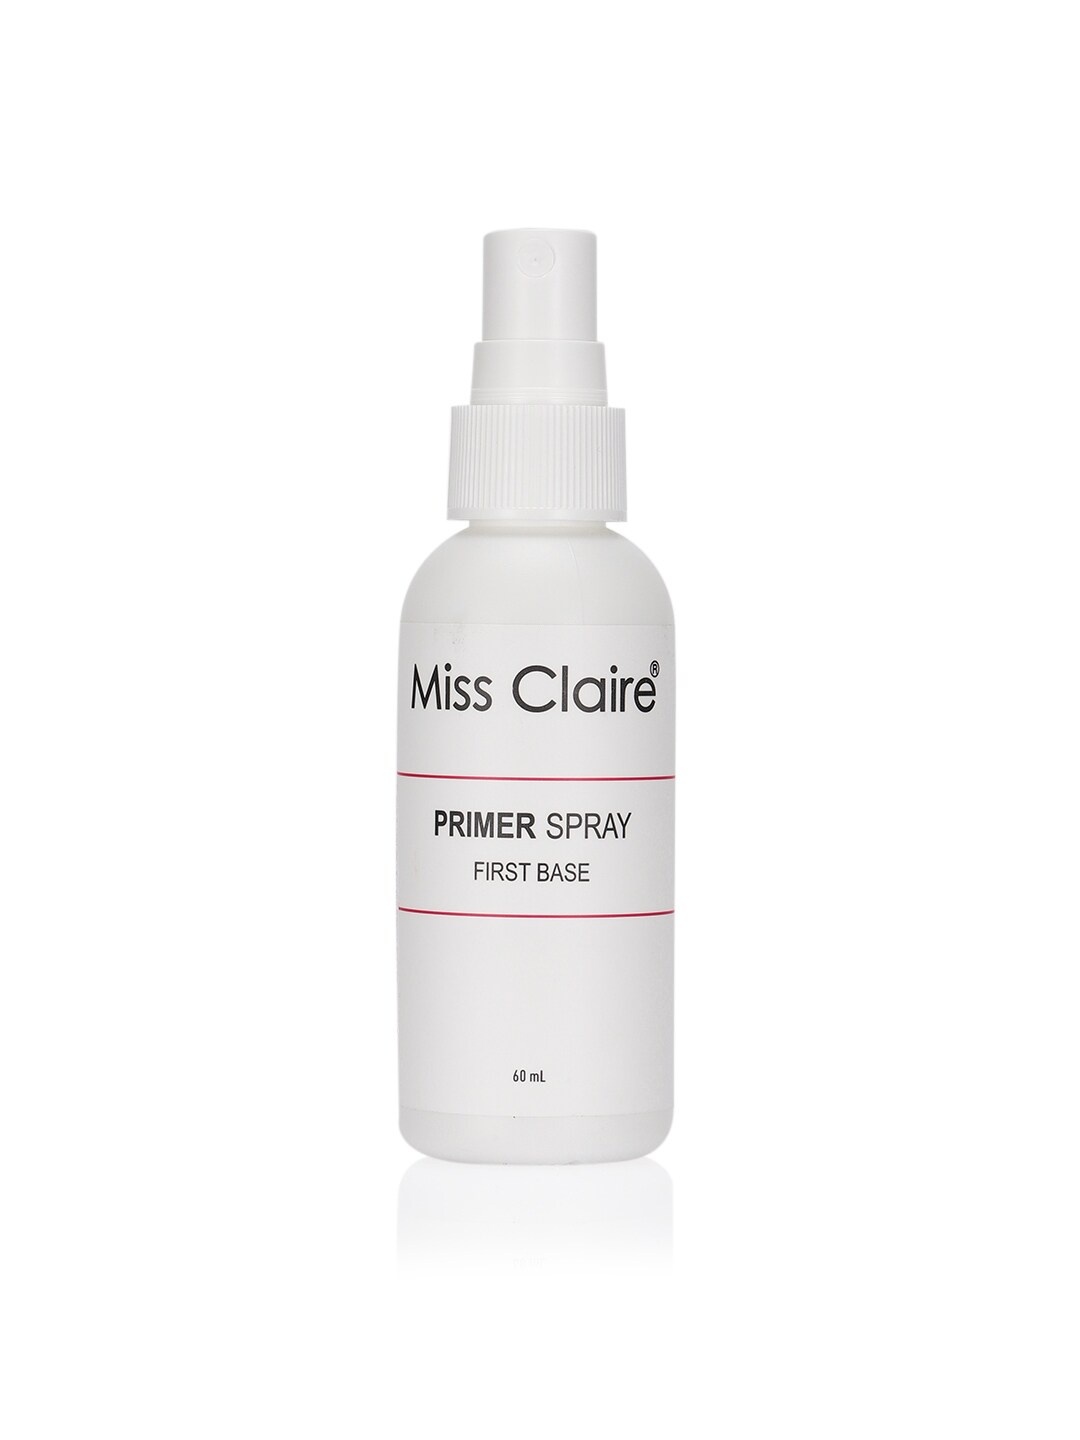 Miss Claire Primer Spray First Base 60 ml Price in India